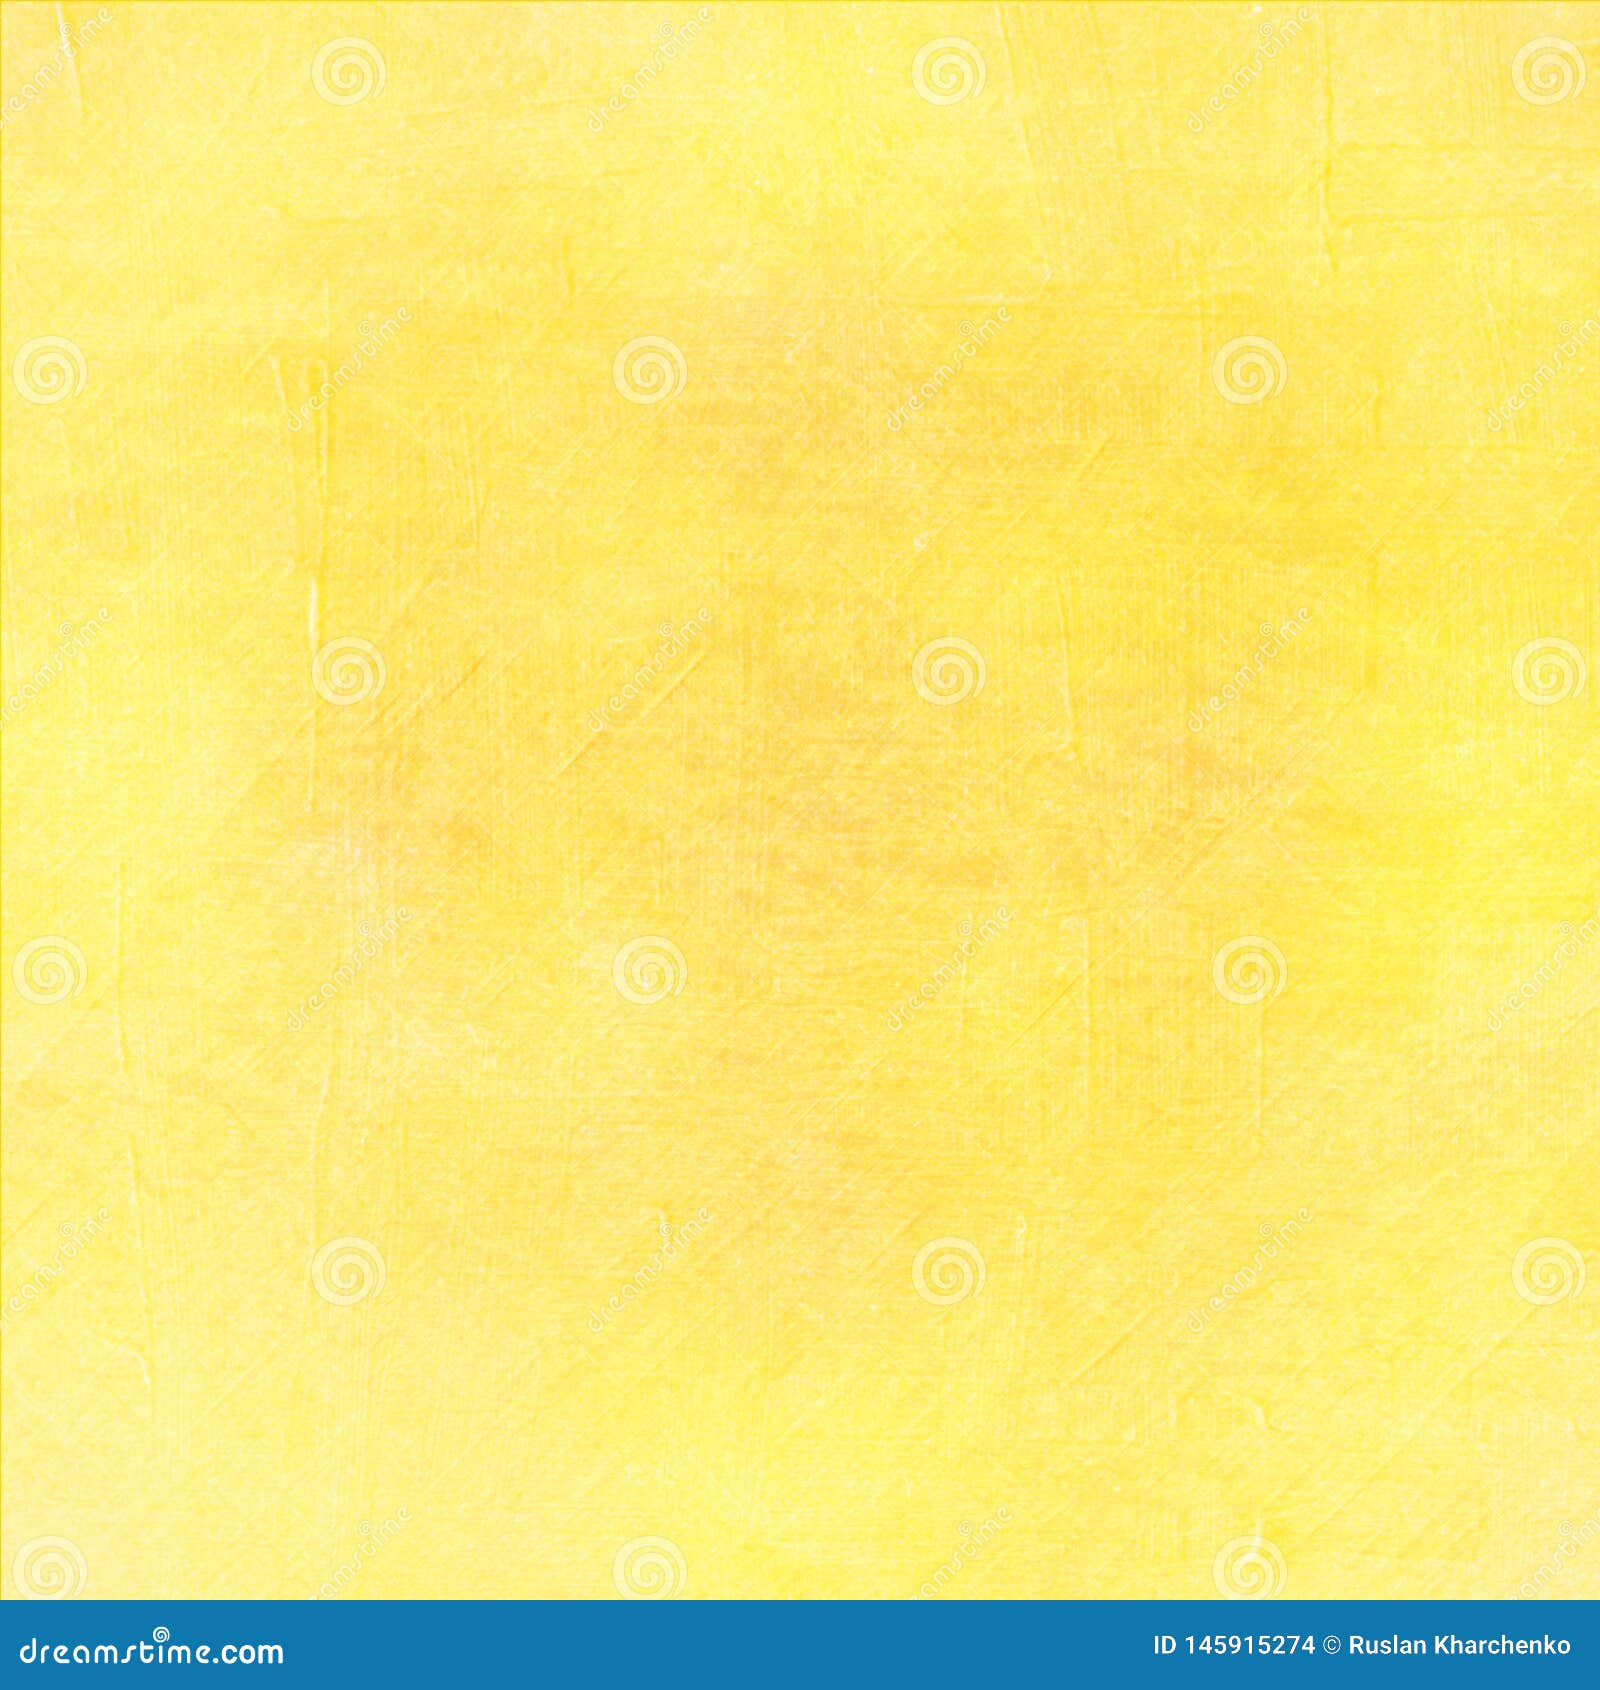 Download Red and yellow texture for free  Yellow textures Metal background  Texture